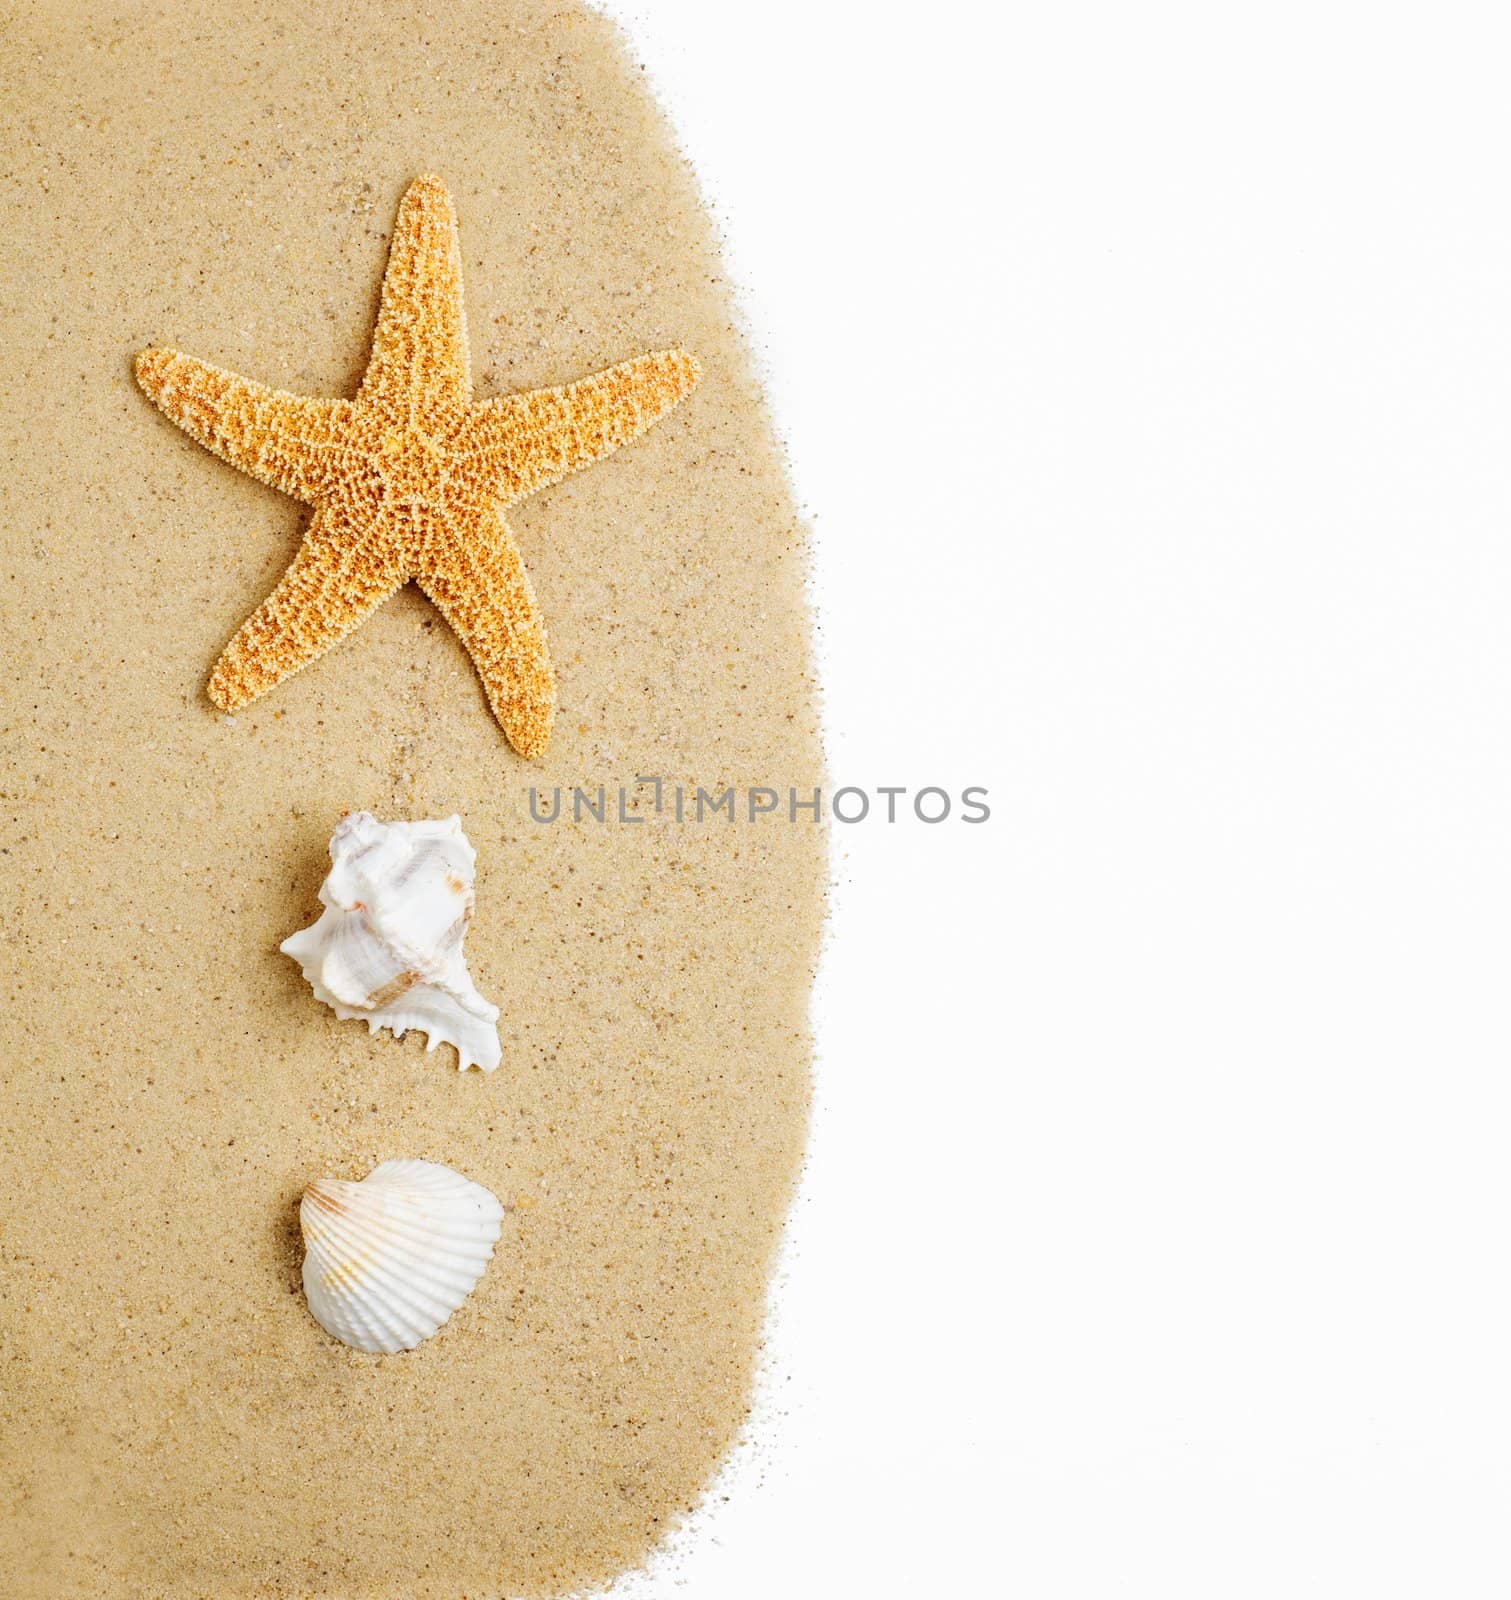 Beach scene photographed against a white background.